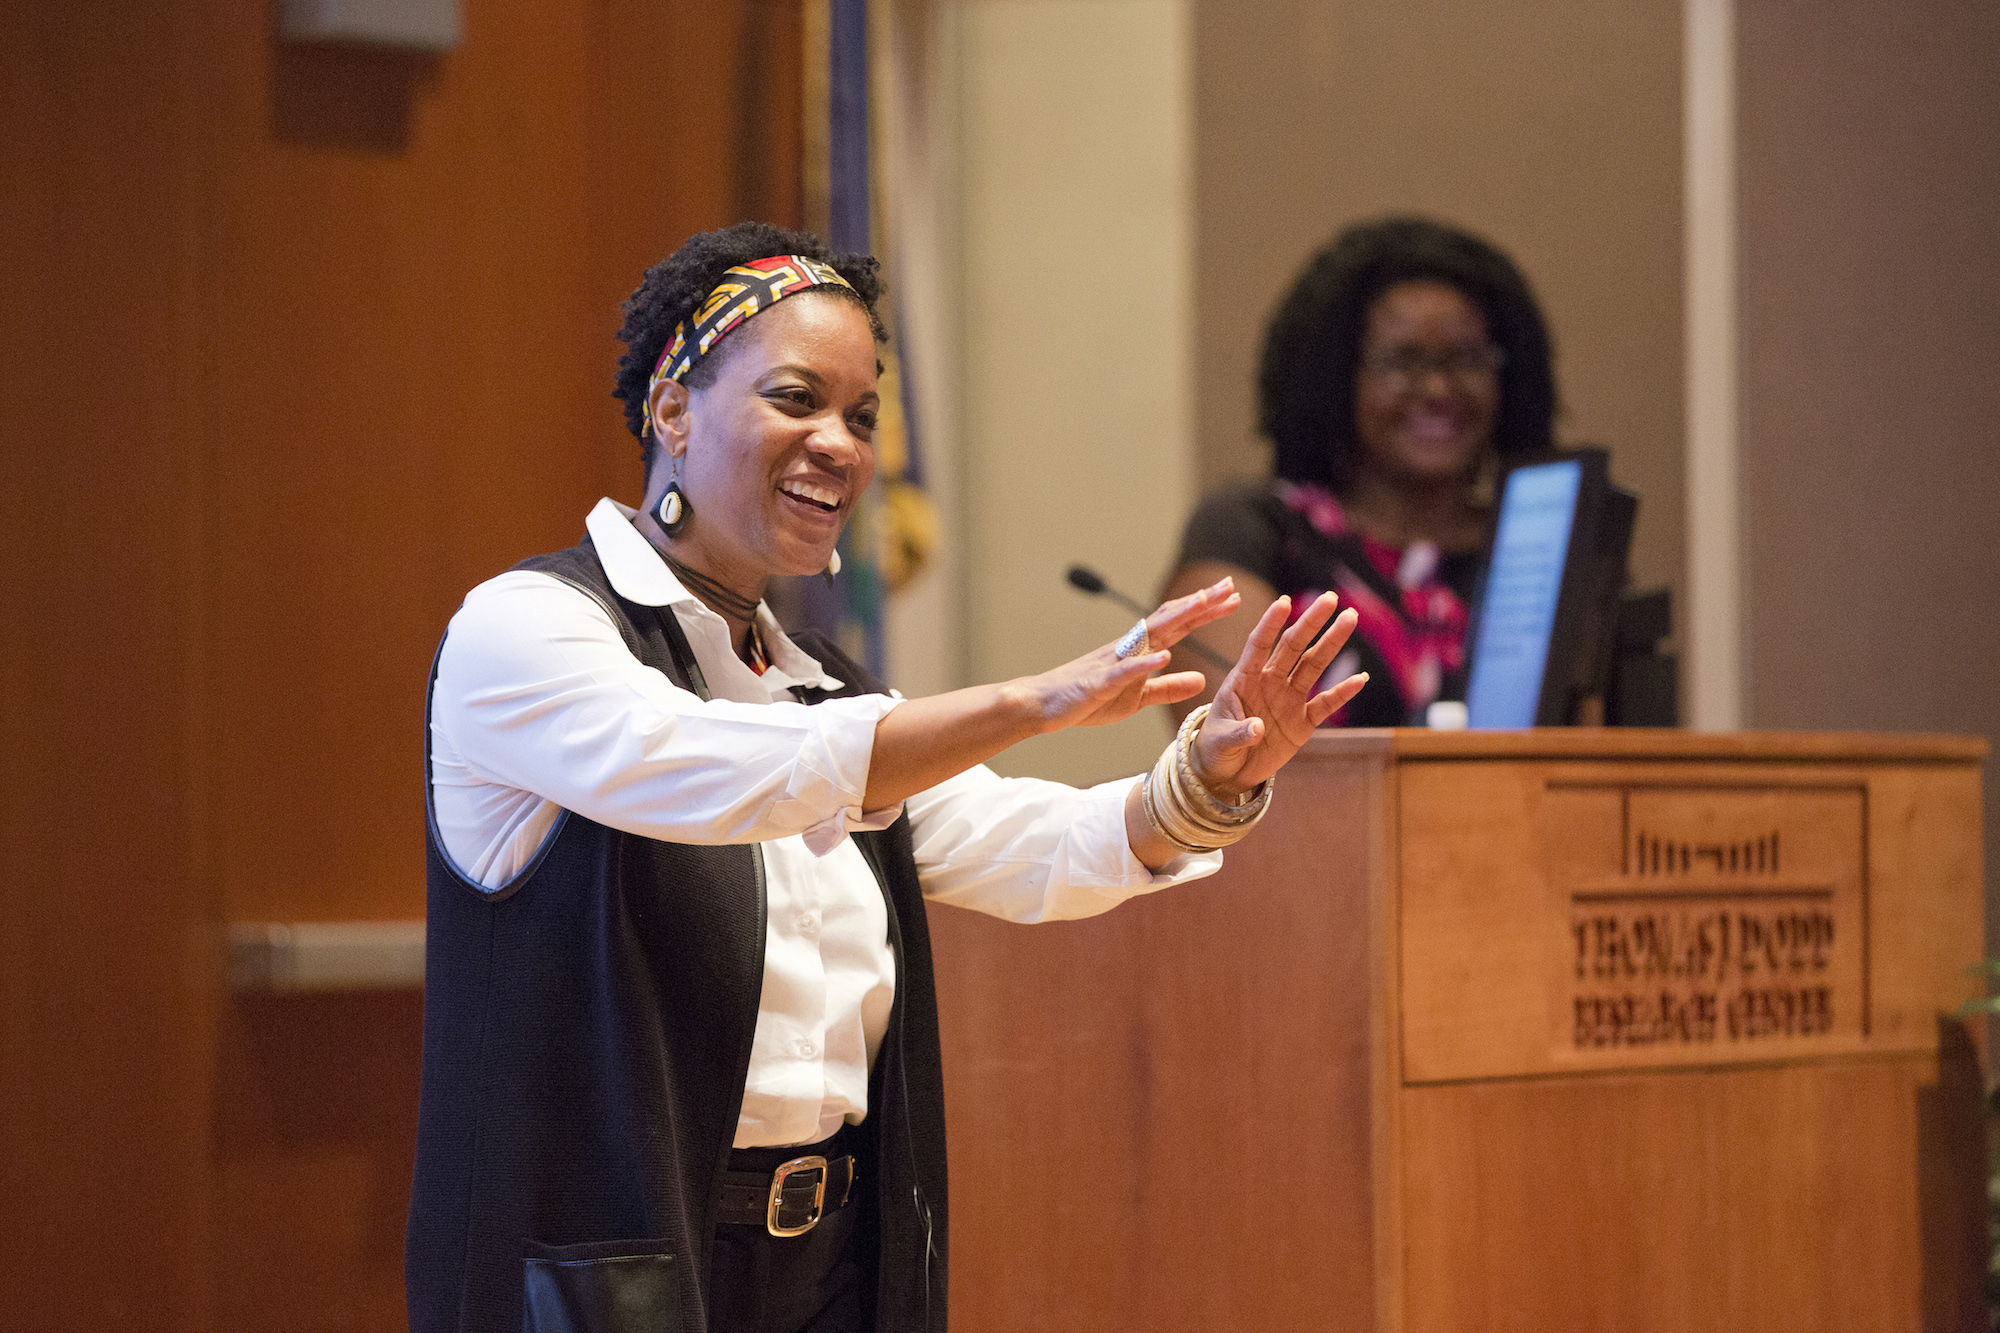 Julia Jordan-Zachery '97 Ph.D., Director of Black Studies at Providence College, speaks at the launch event of the Collaborative to Advance Equity Through Research on Women and Girls of Color on 9.28.2016. (Bri Diaz/UConn Photo)